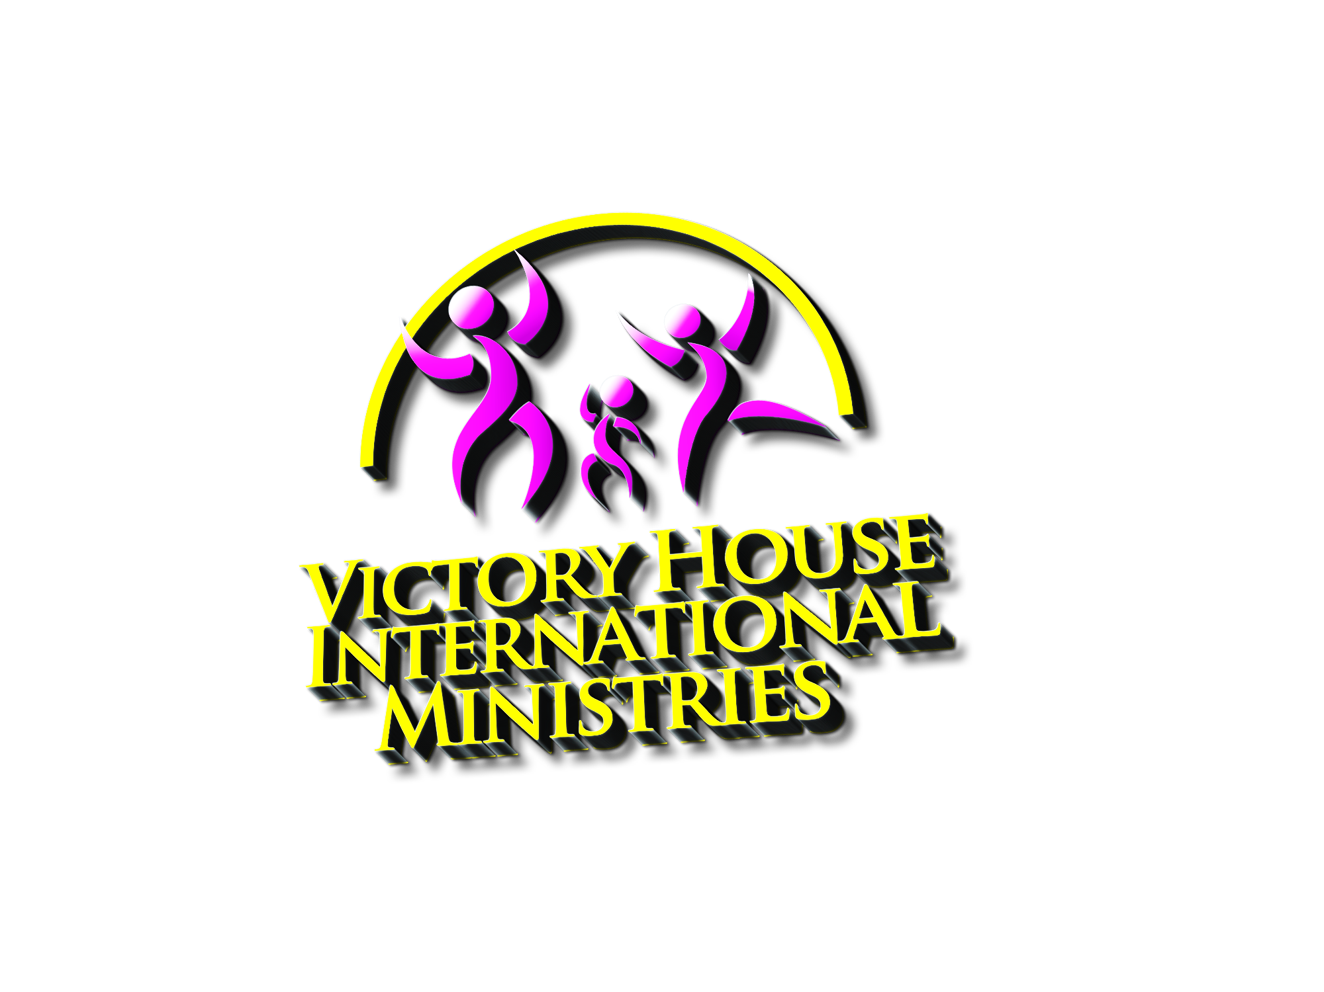 Victory House International Ministries